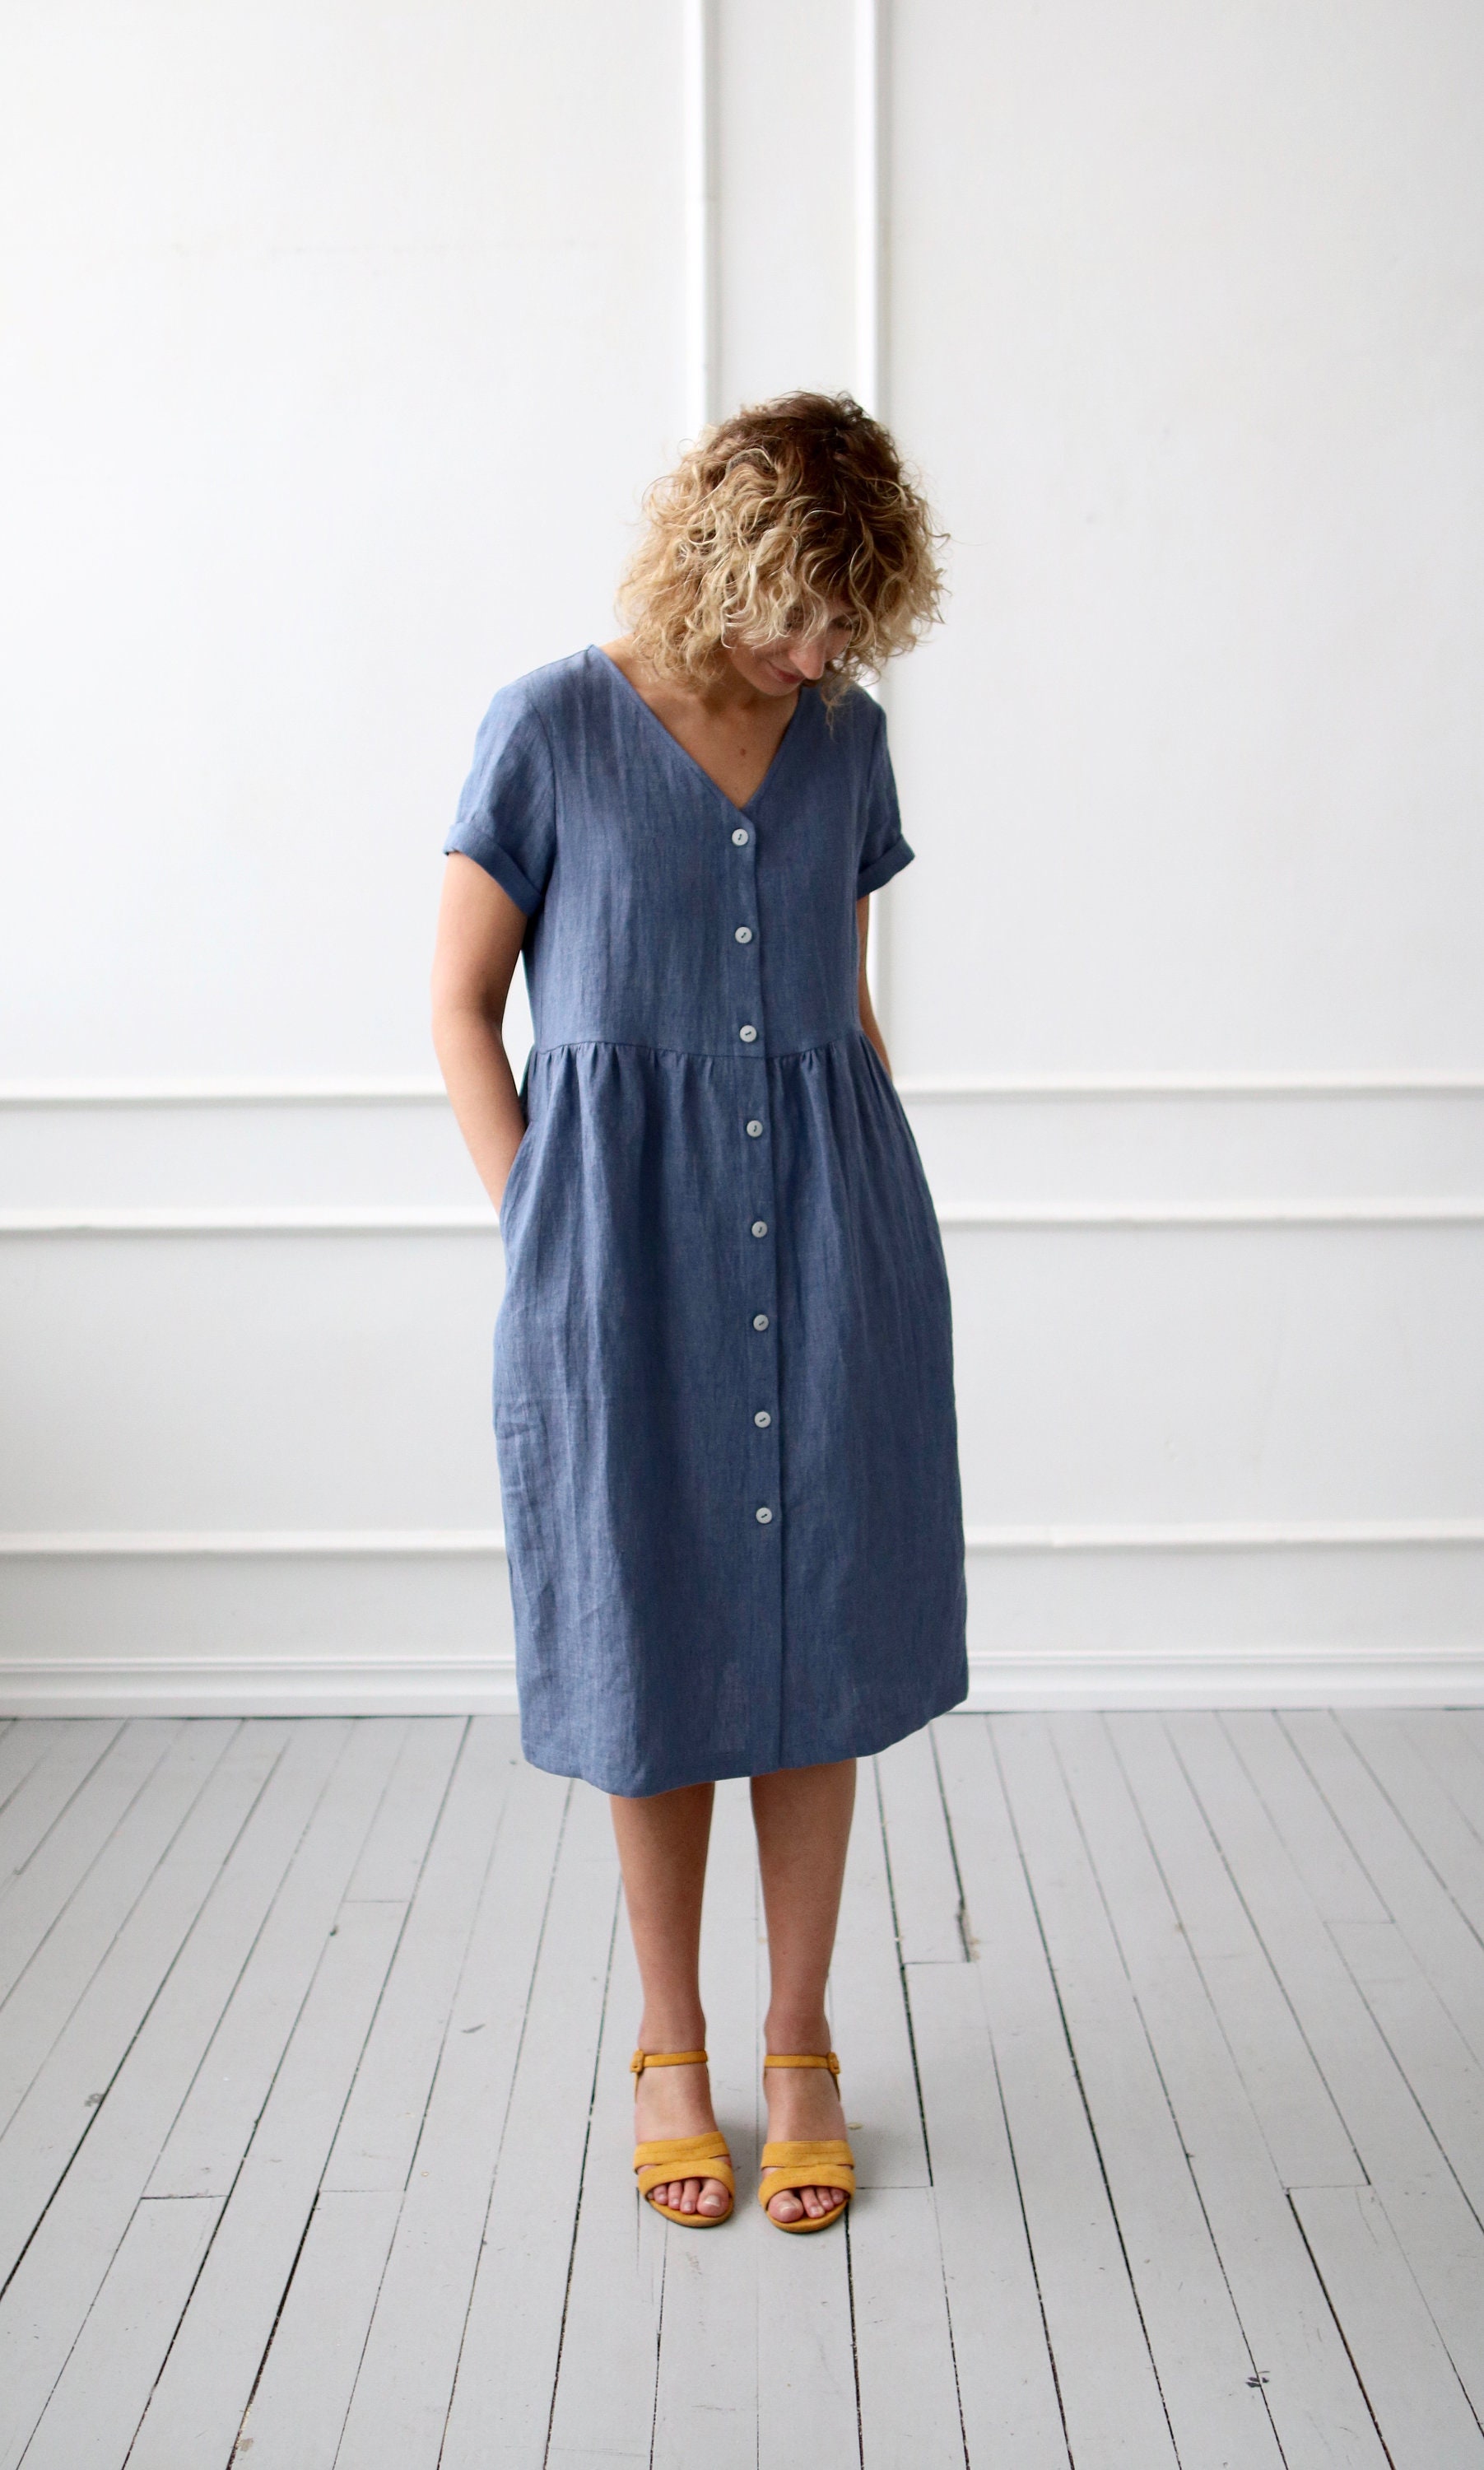 Linen Dress With Button Closure in Denim Blue Color/offon | Etsy